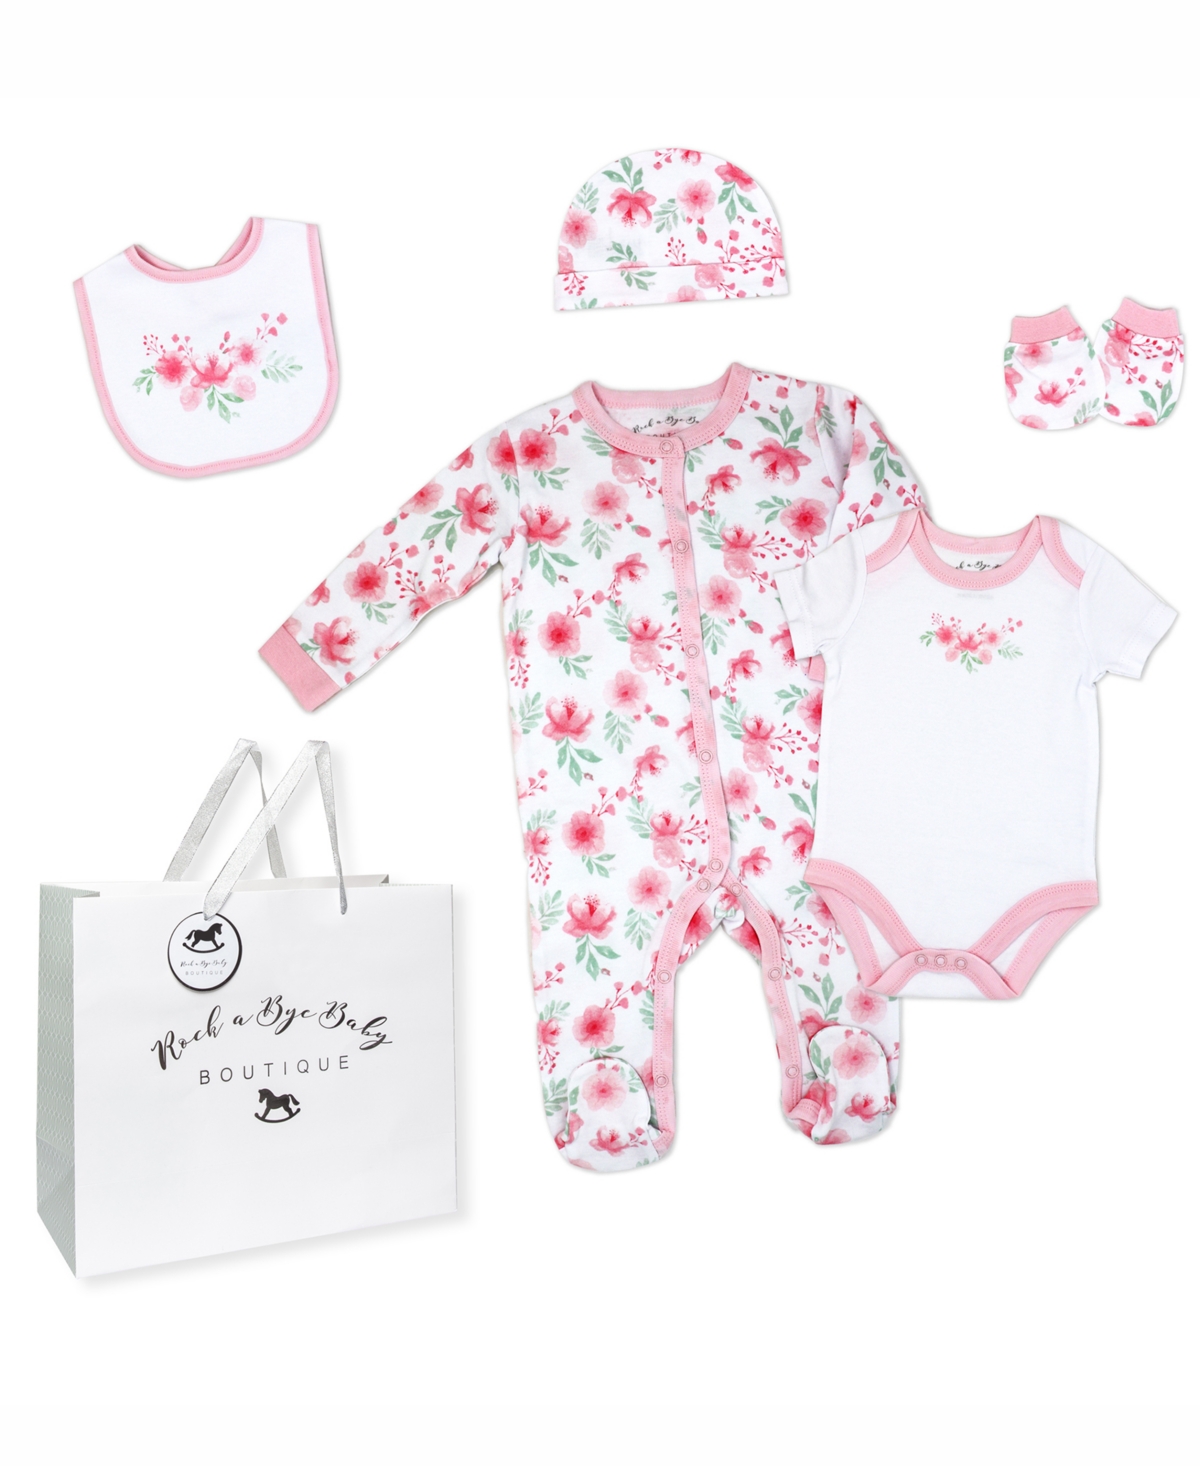 Rock-a-bye Baby Boutique Baby Girls Layette Gift Bag Set In Soft Floral